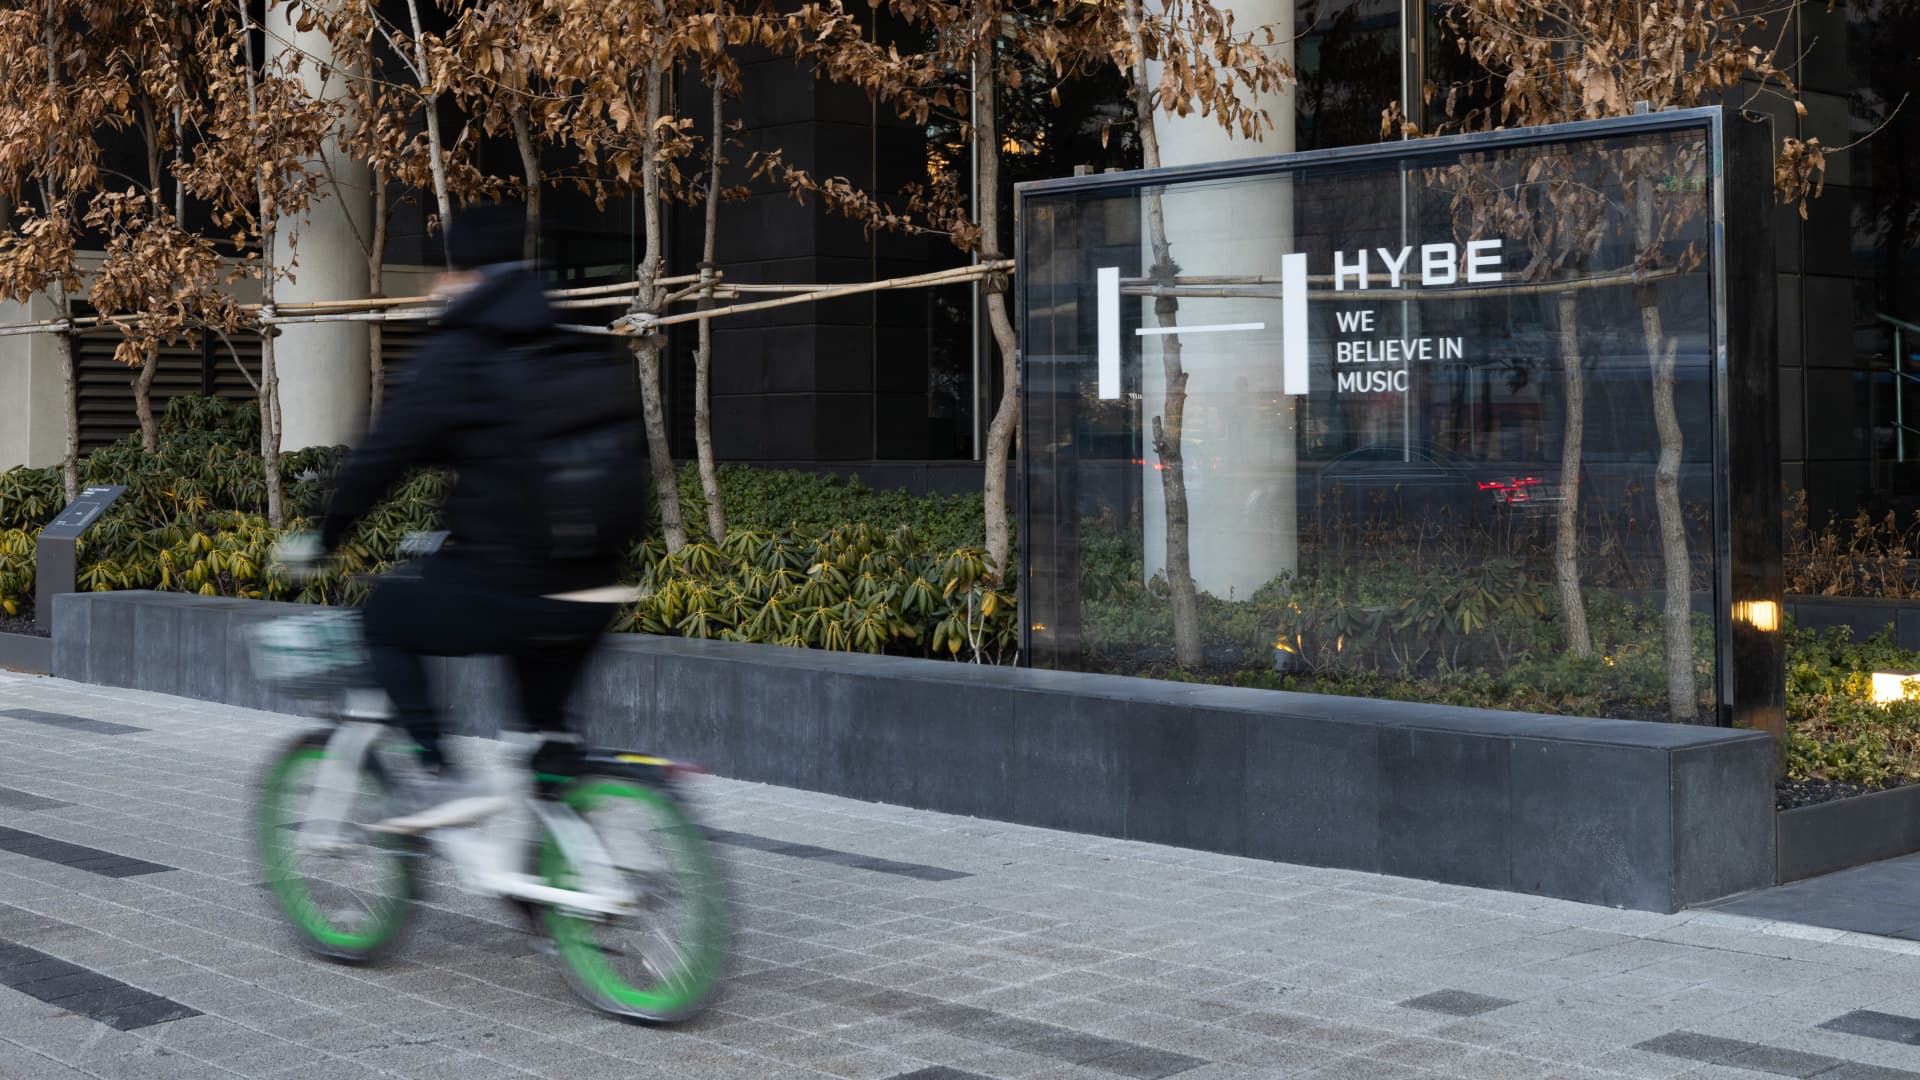 South Korea’s largest K-pop agency Hybe accuses sublabel executives of breach of trust